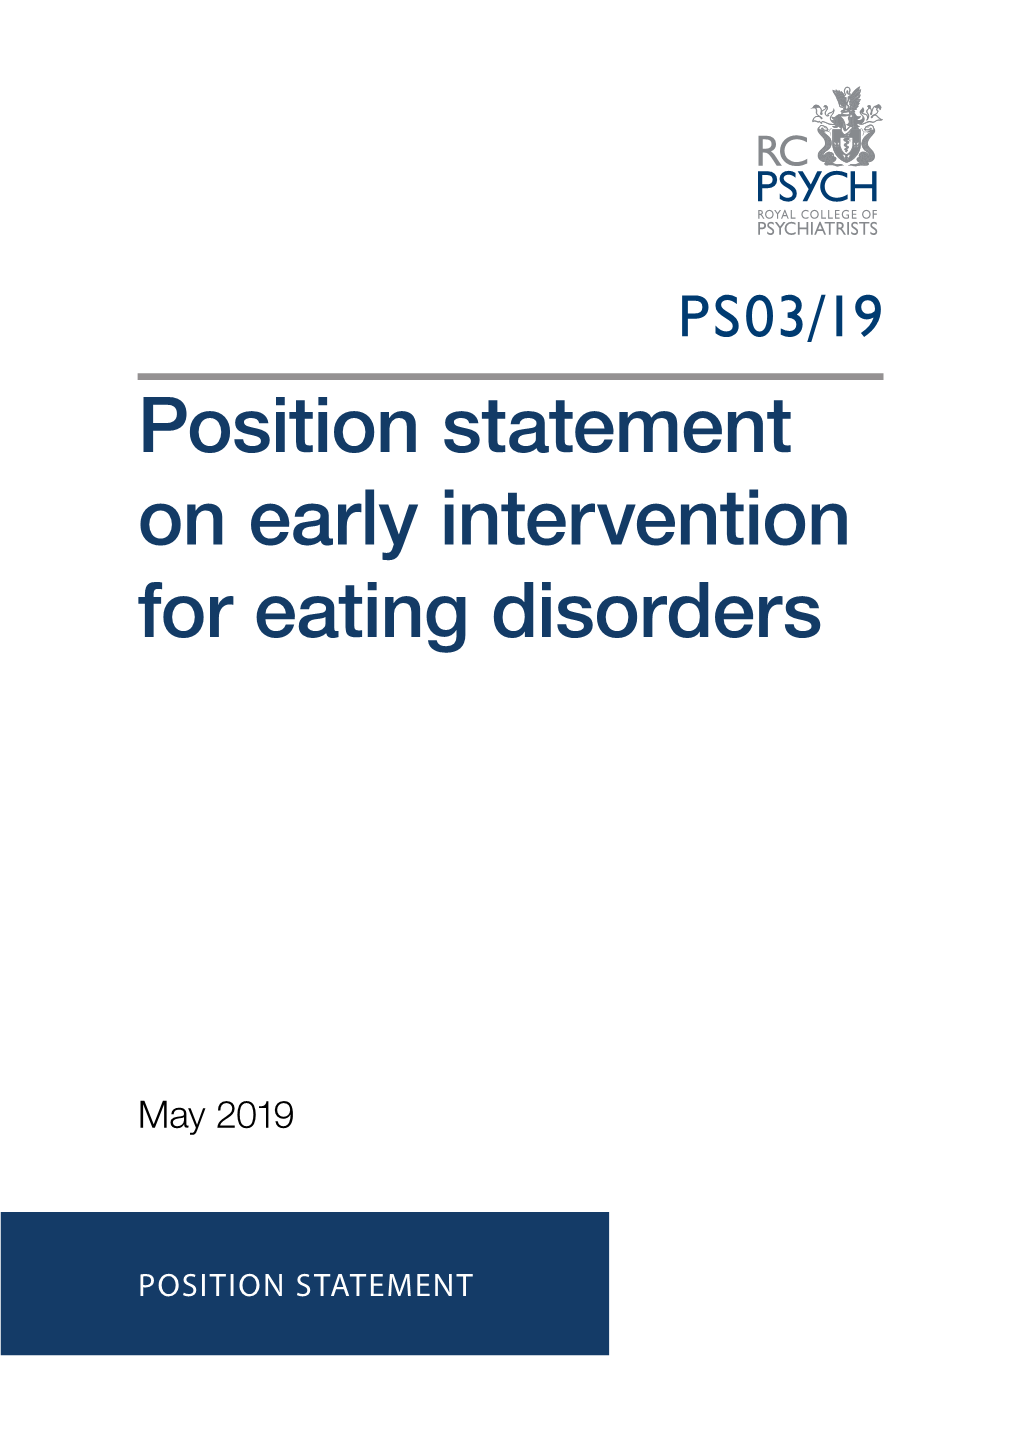 Position Statement on Early Intervention for Eating Disorders